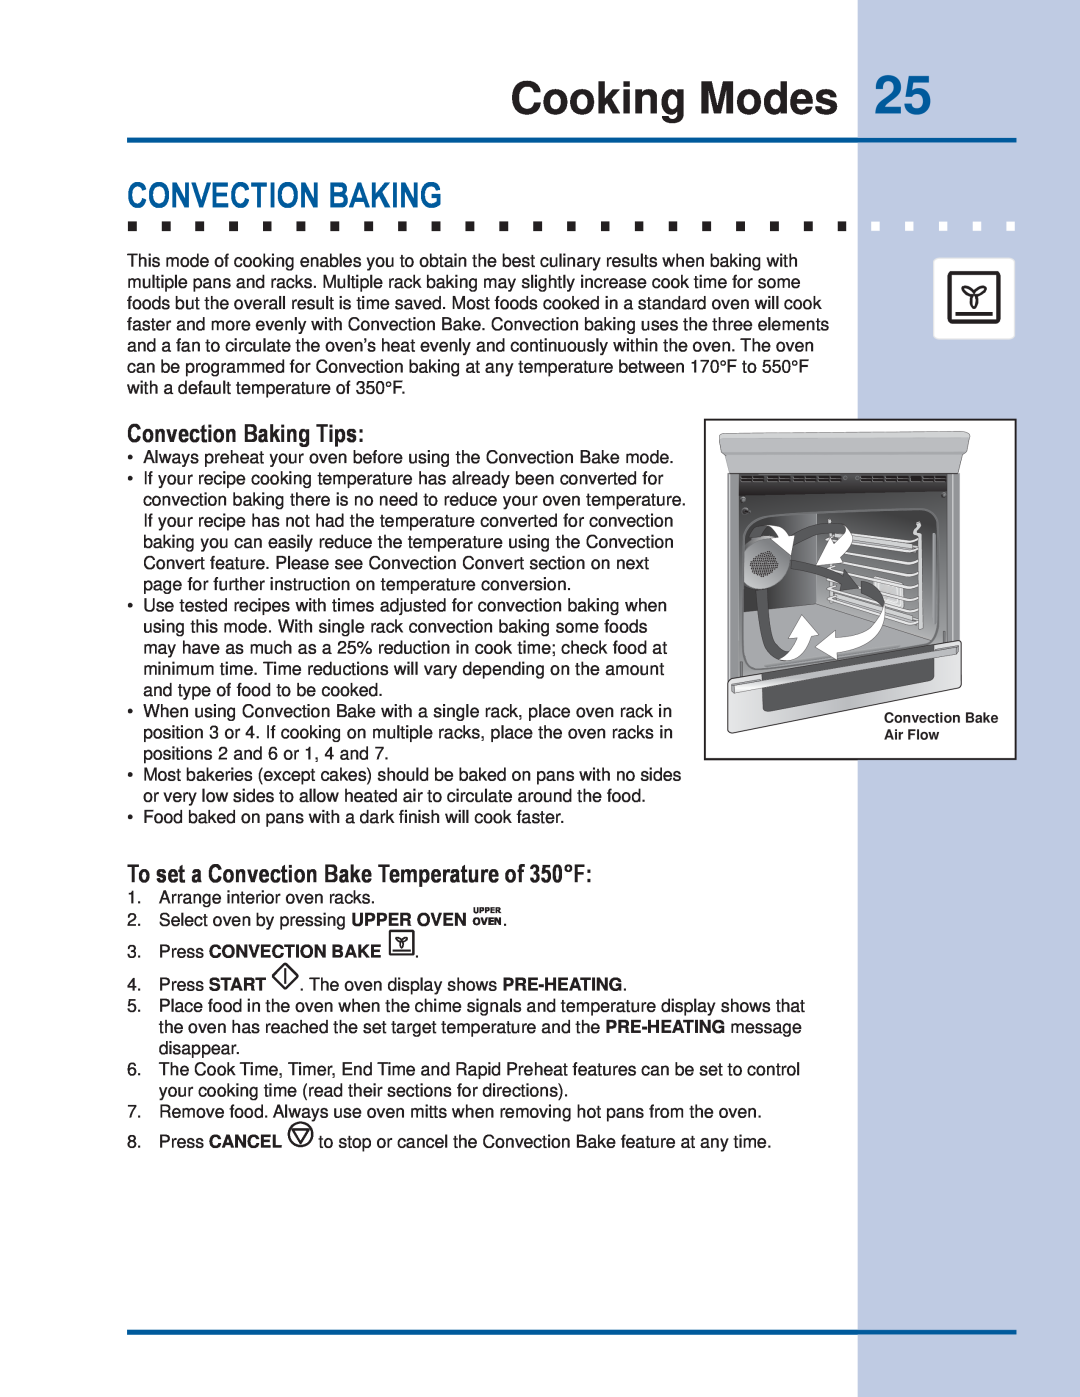 Electrolux EI30ES55JS manual Convection Baking Tips, To set a Convection Bake Temperature of 350F, Cooking Modes 